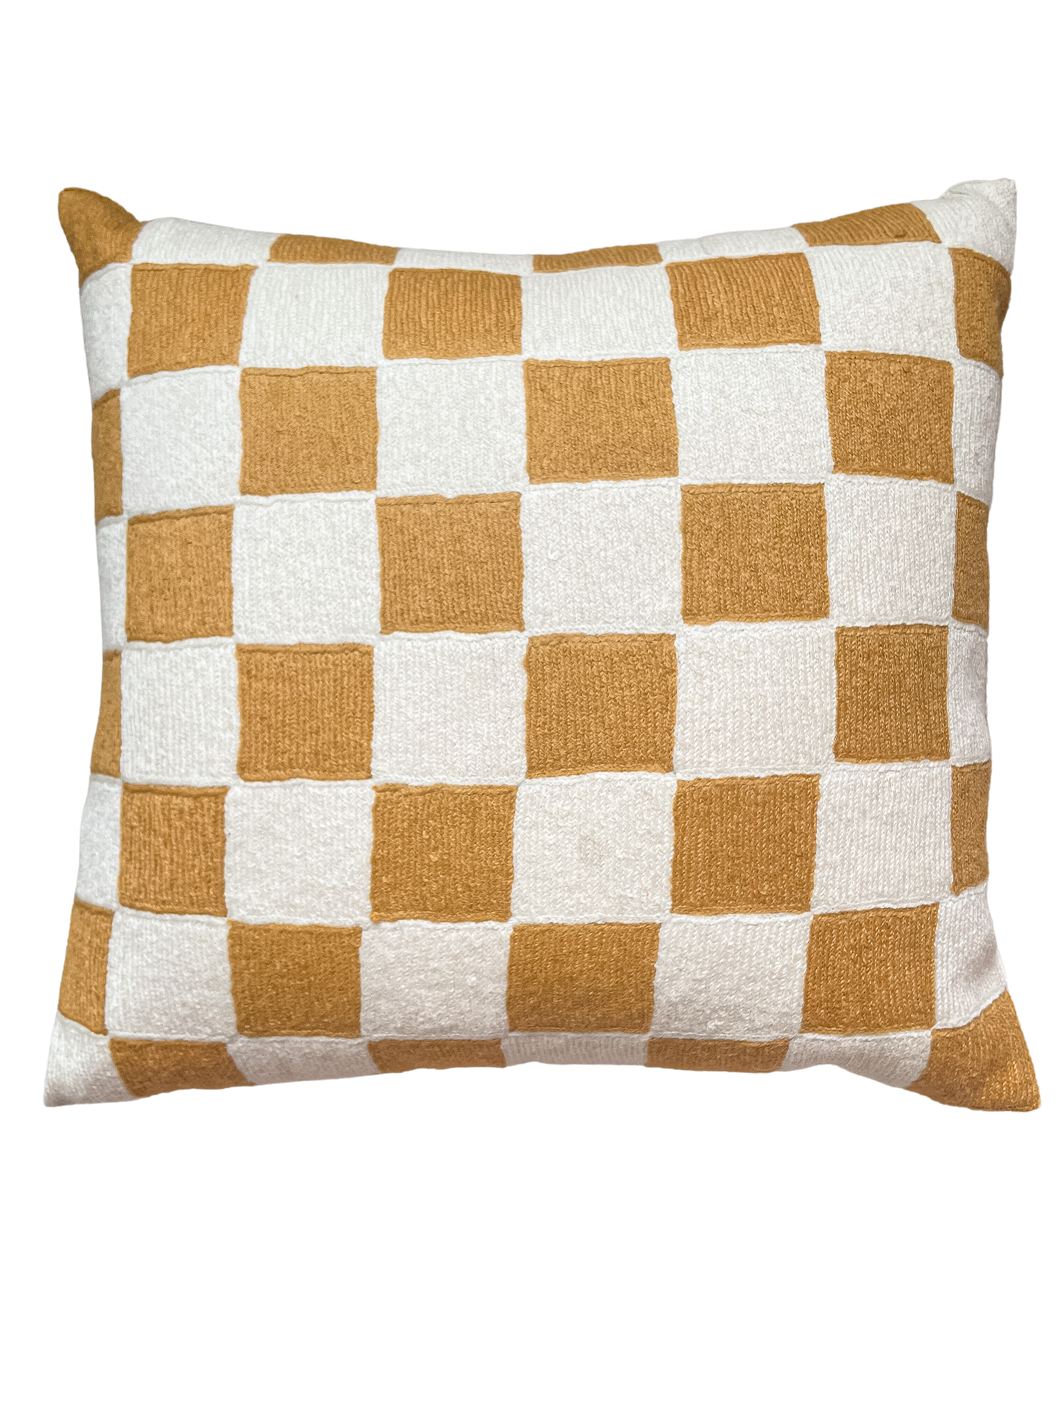 *NEW* Handmade crewel embroidered cushion cover | ochre yellow check - Moppet